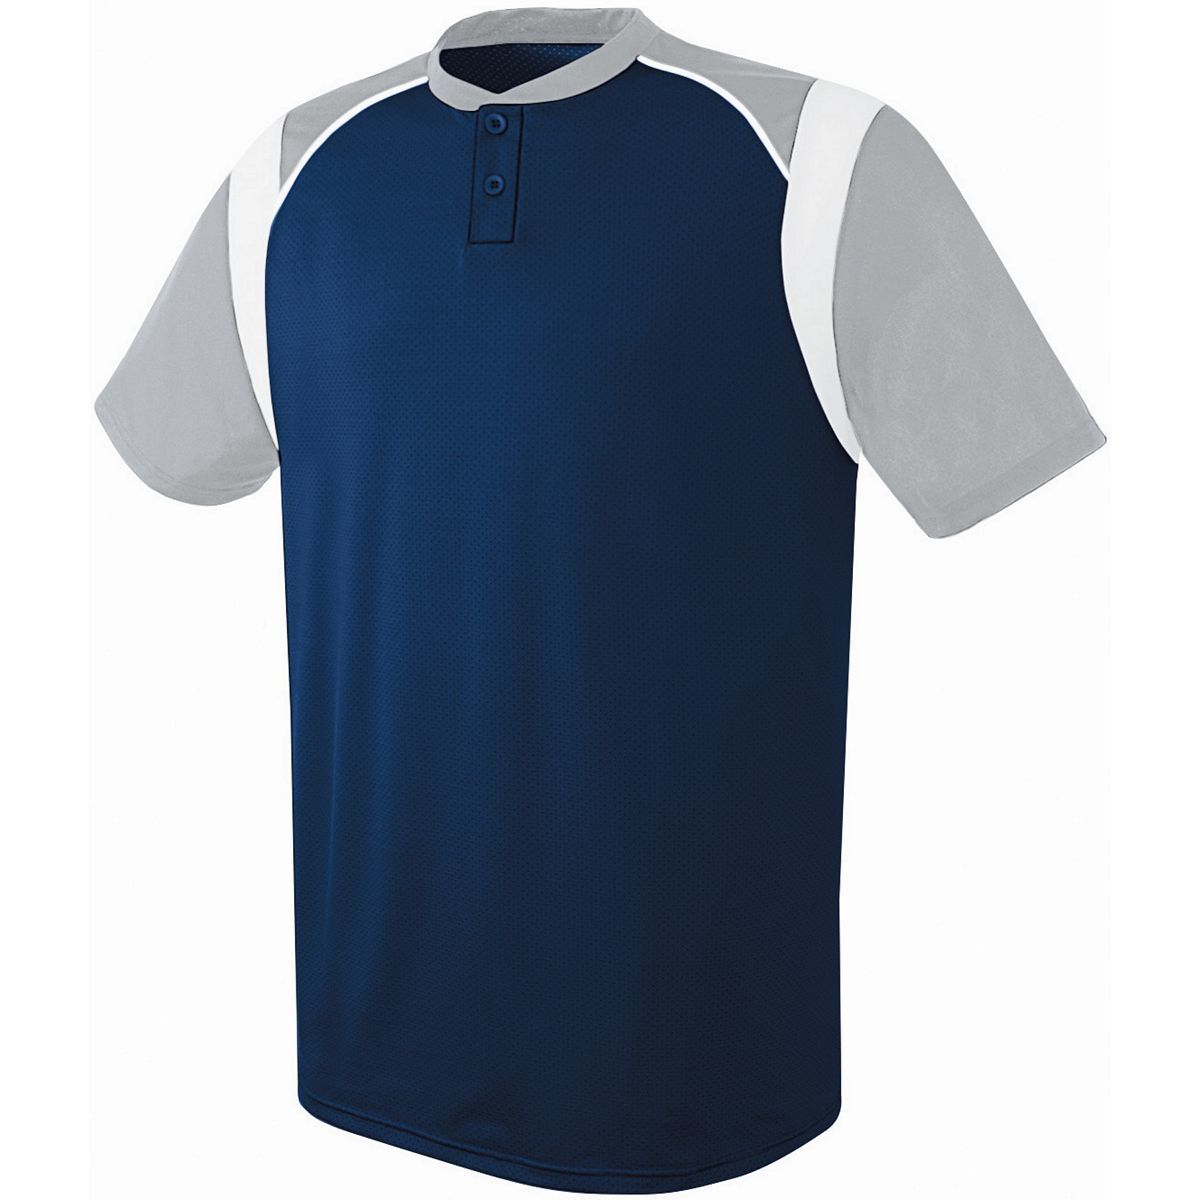 Augusta Sportswear Wildcard Two-Button Jersey in Navy/Silver Grey/White  -Part of the Adult, Adult-Jersey, Augusta-Products, Baseball, Shirts, All-Sports, All-Sports-1 product lines at KanaleyCreations.com